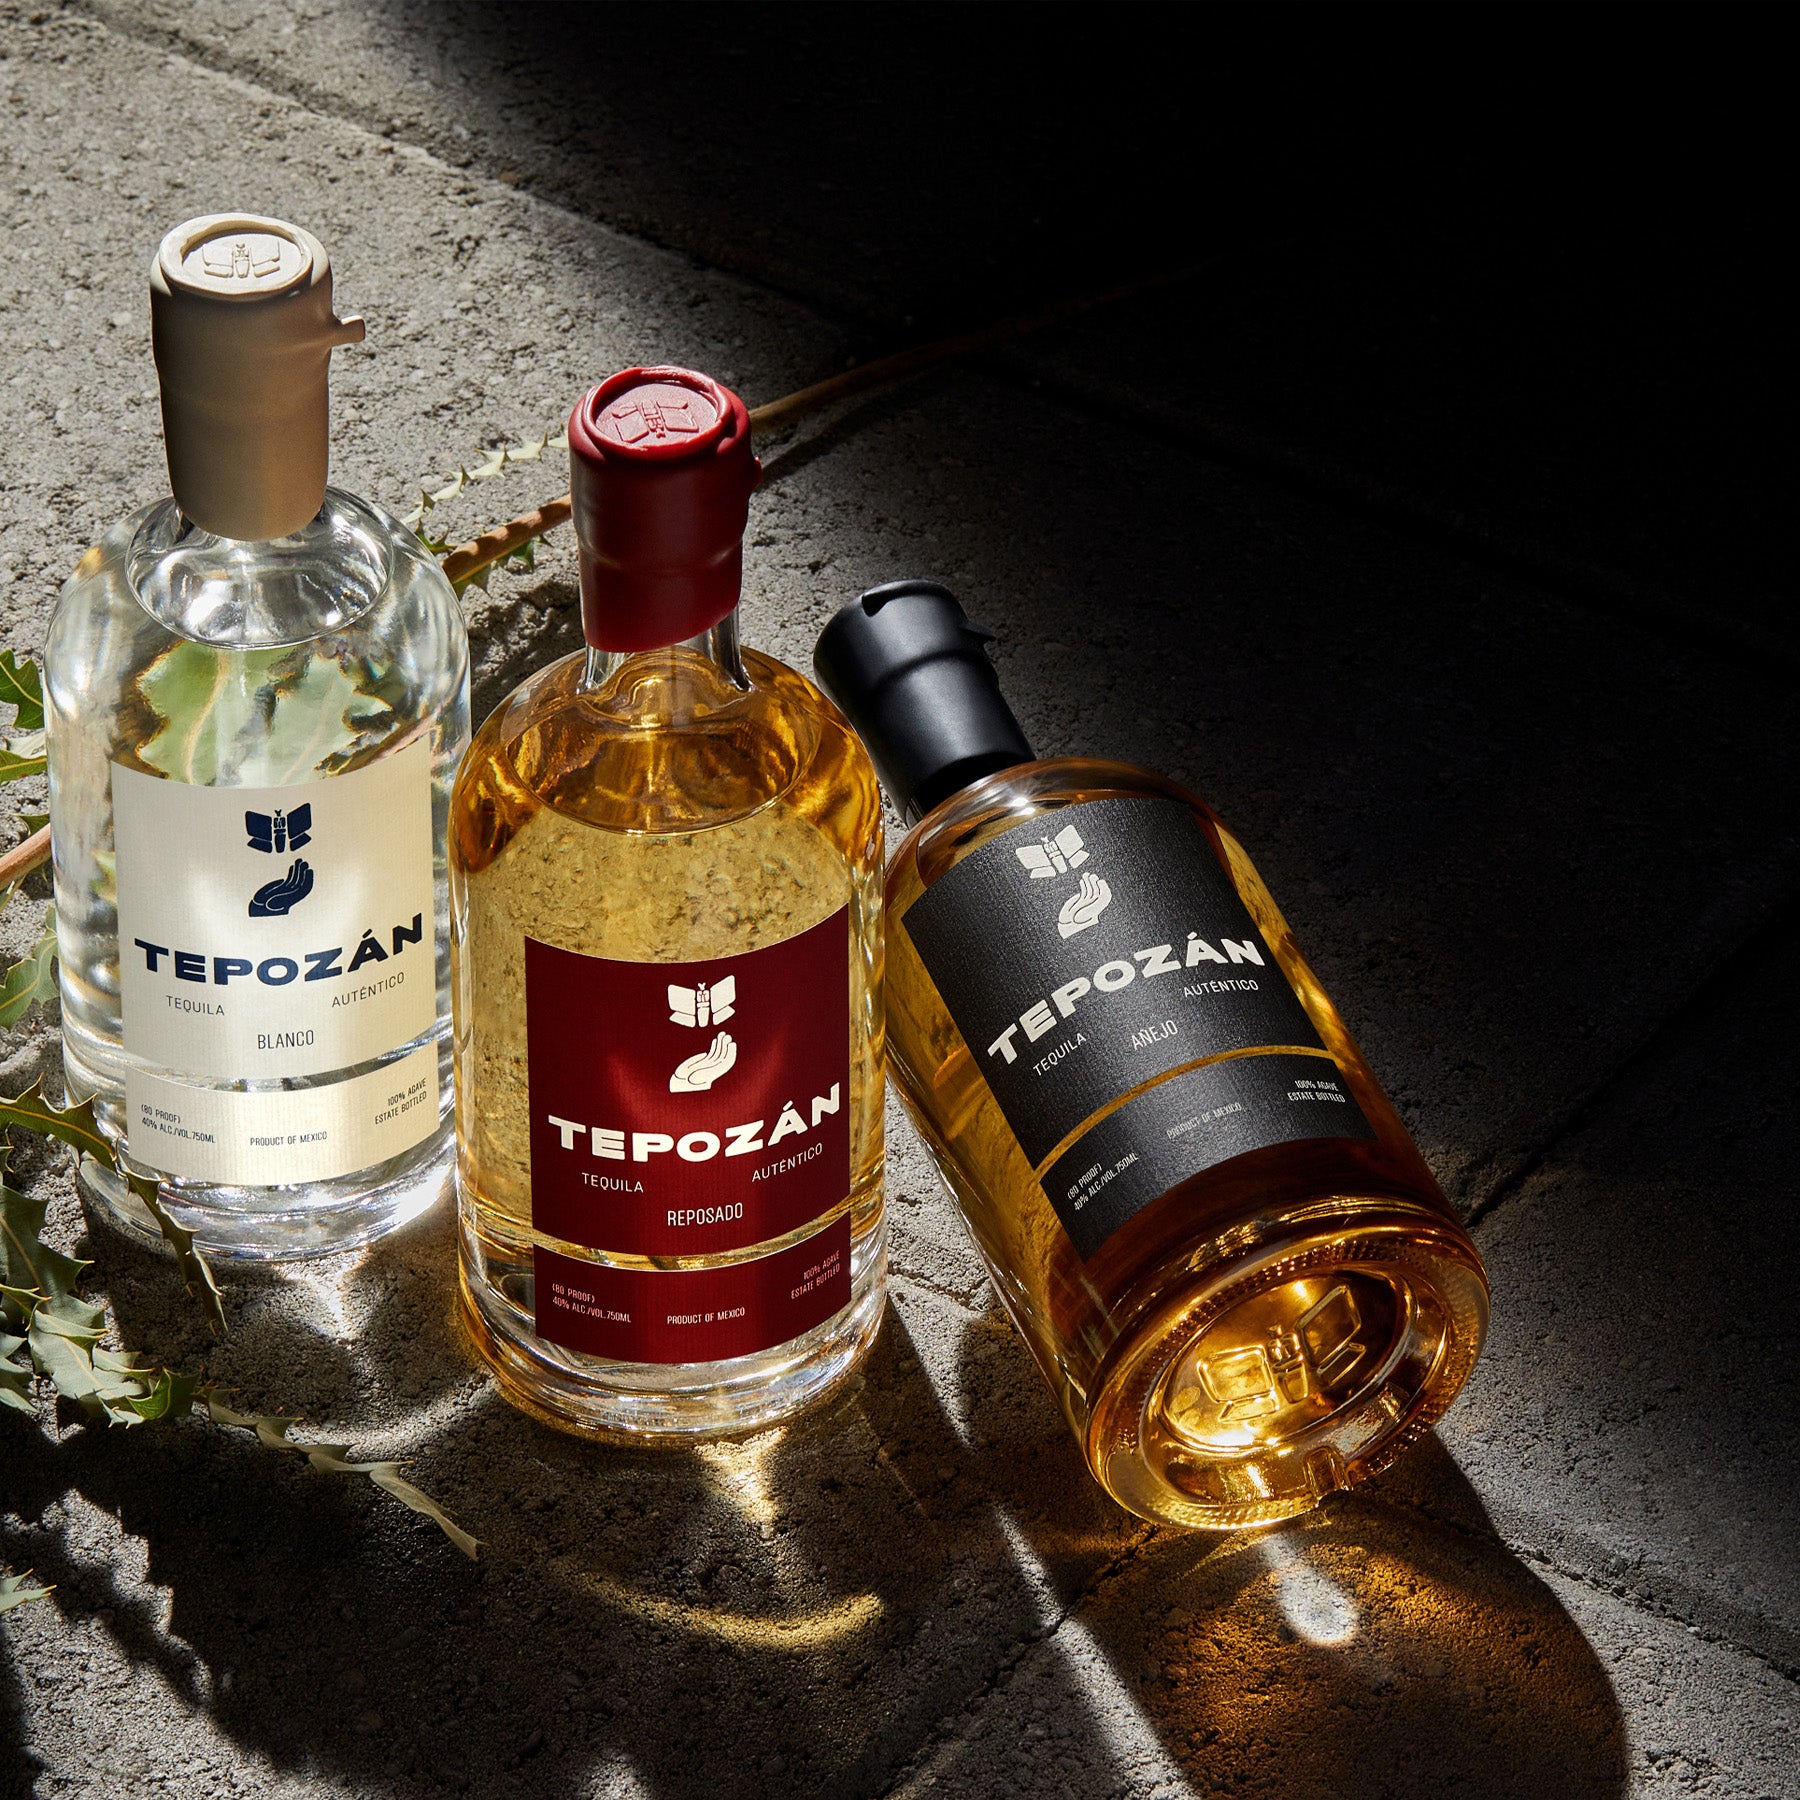 Tepozan Tequila Family Collection